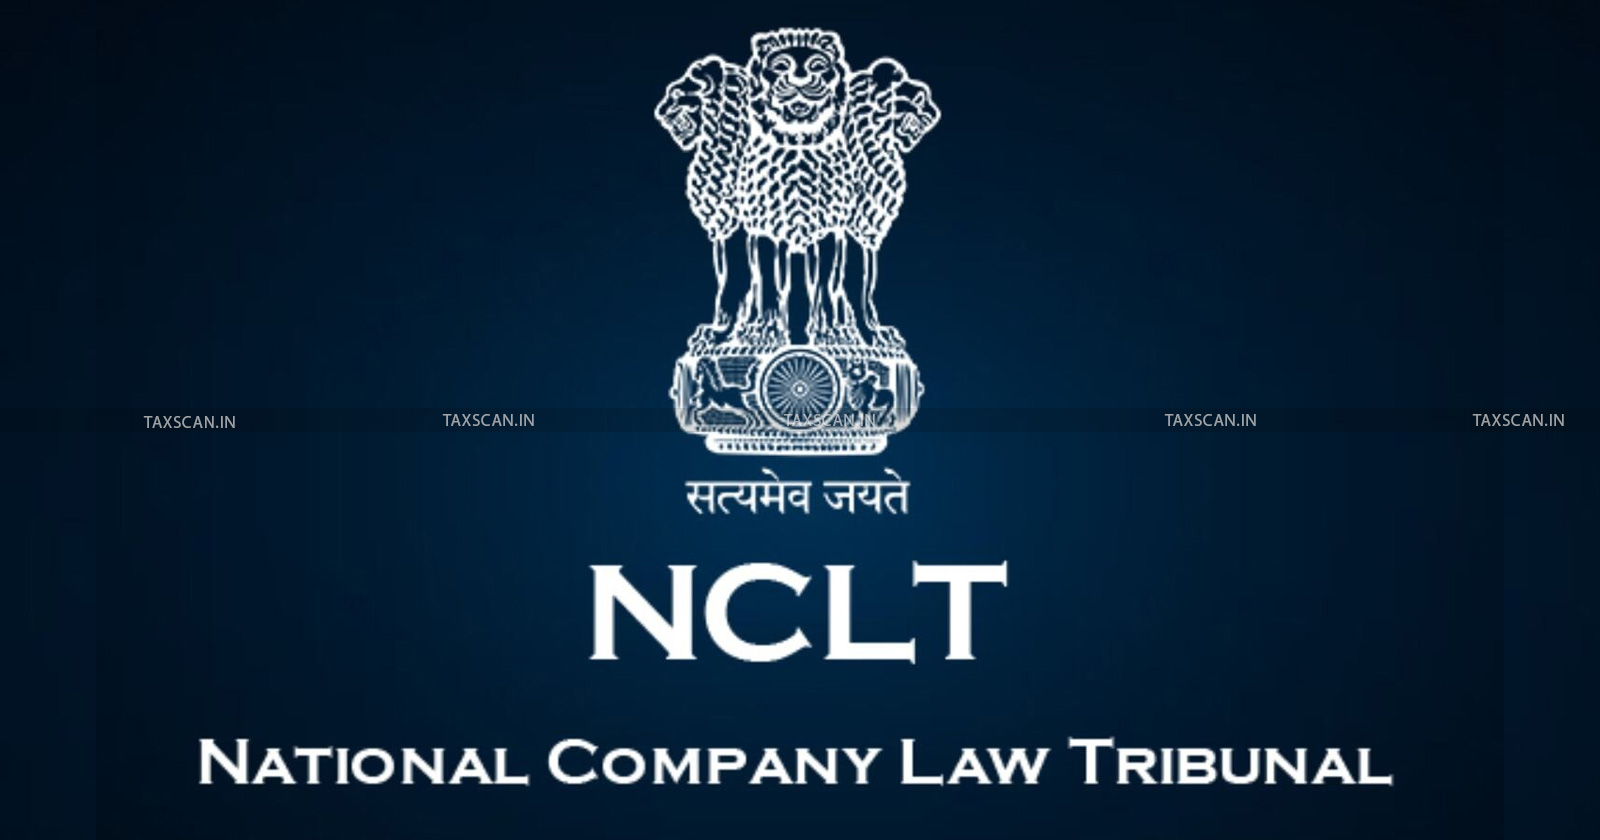 Airport Authority of India - Corporate Person under IBC - IBC - NCLT - Statutory Body - taxscan